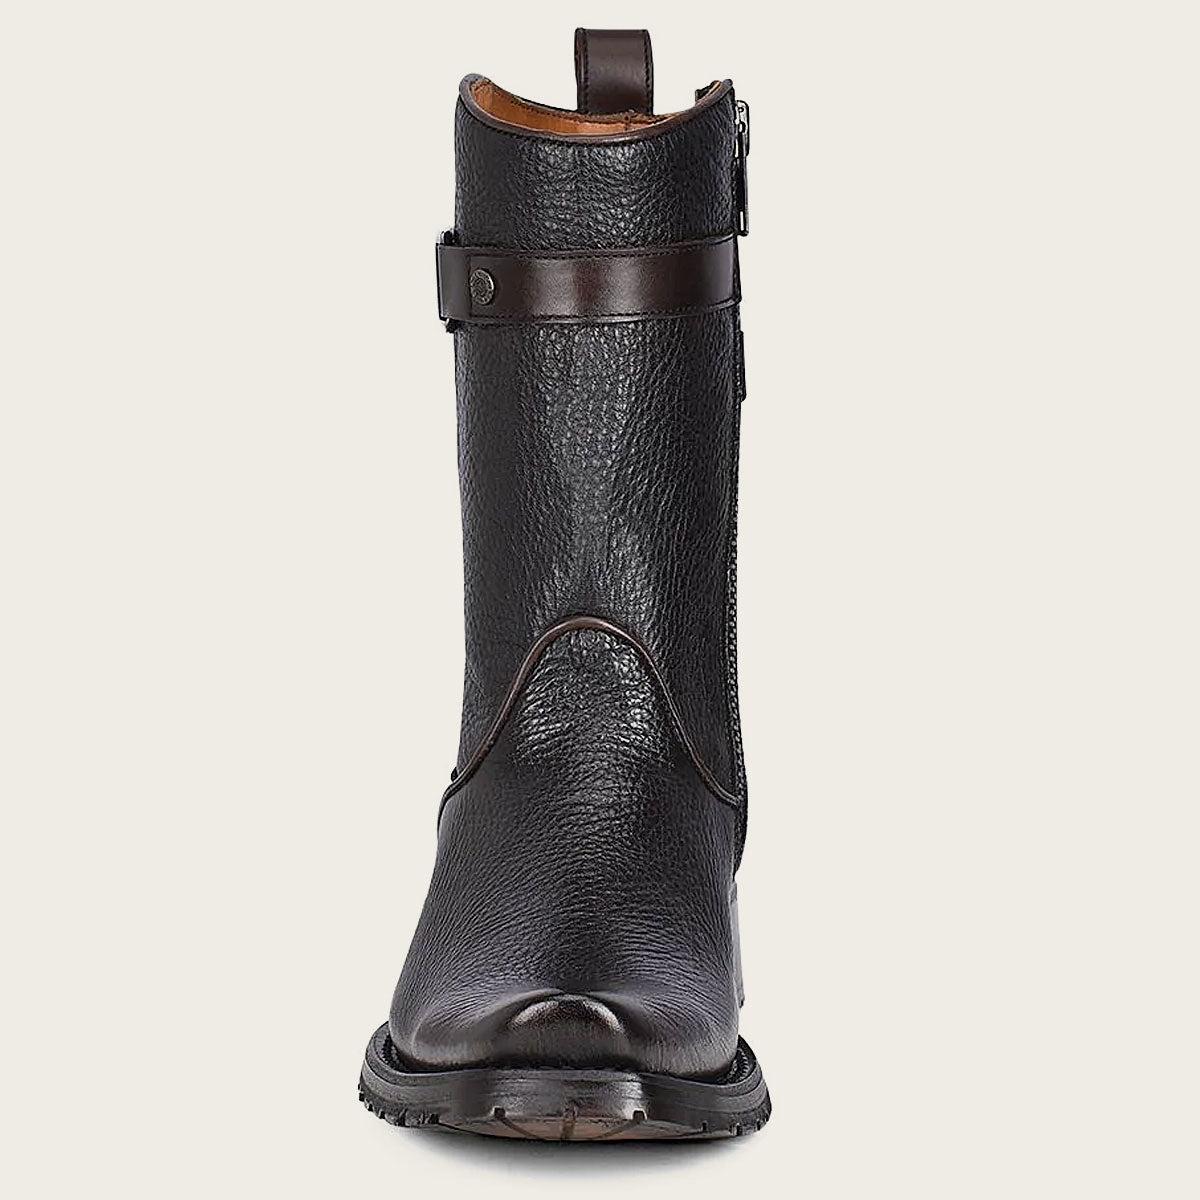 Premium Men's Bovine Leather Boots with Cuadra Logo Embroidery and Strap Detail